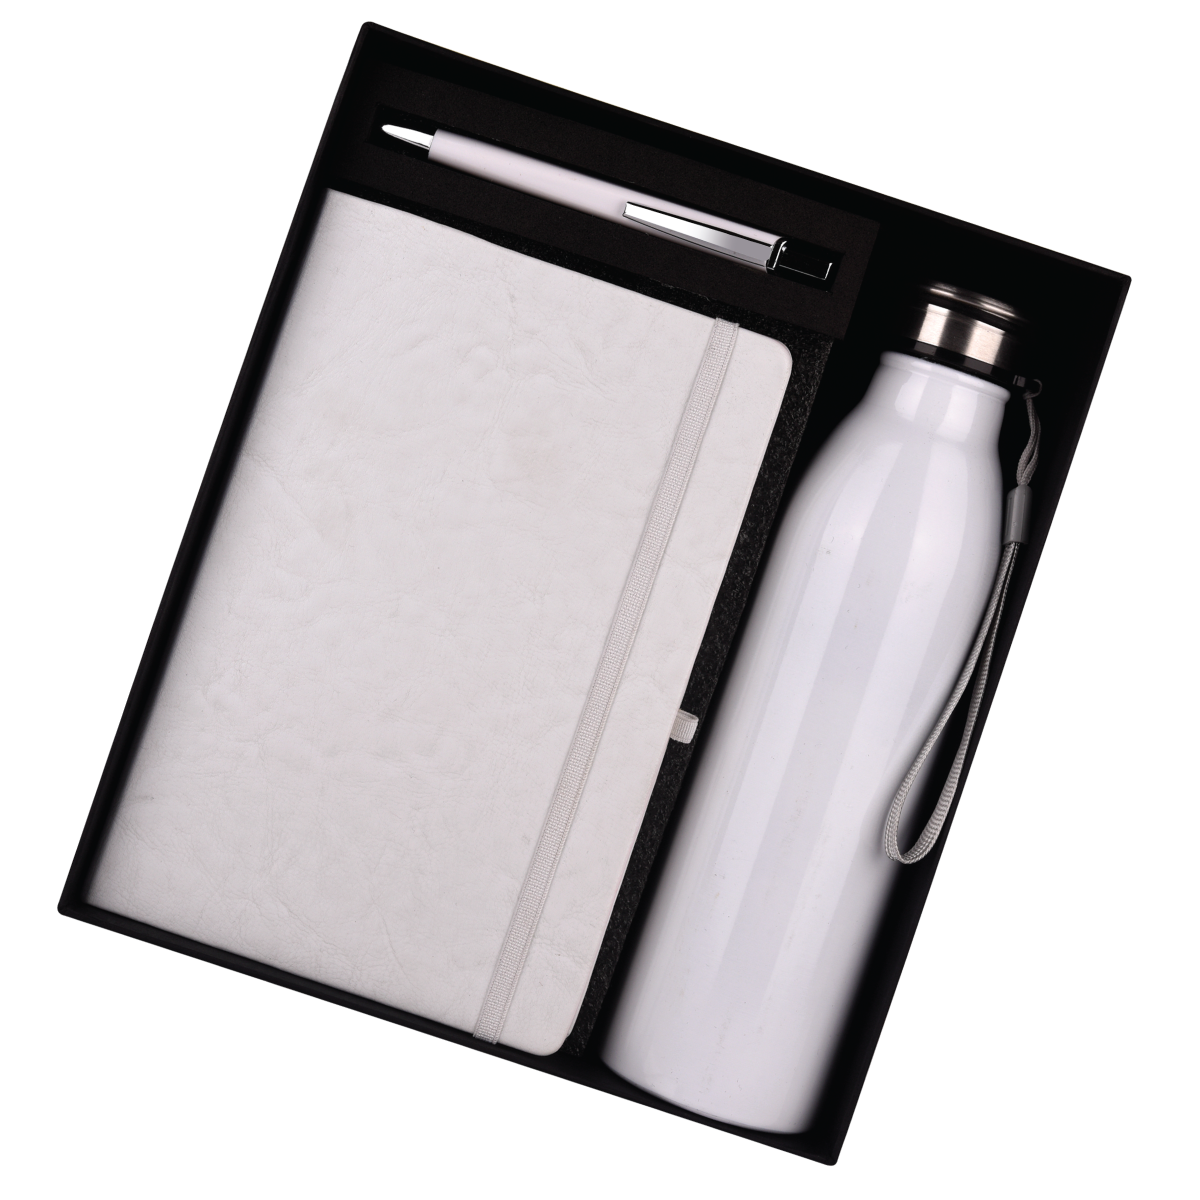 White 3 in 1 Black Combo Gift Set Bottle, Pen, and Notebook - For Employee Joining Kit, Corporate, Client or Dealer Gifting HK37337